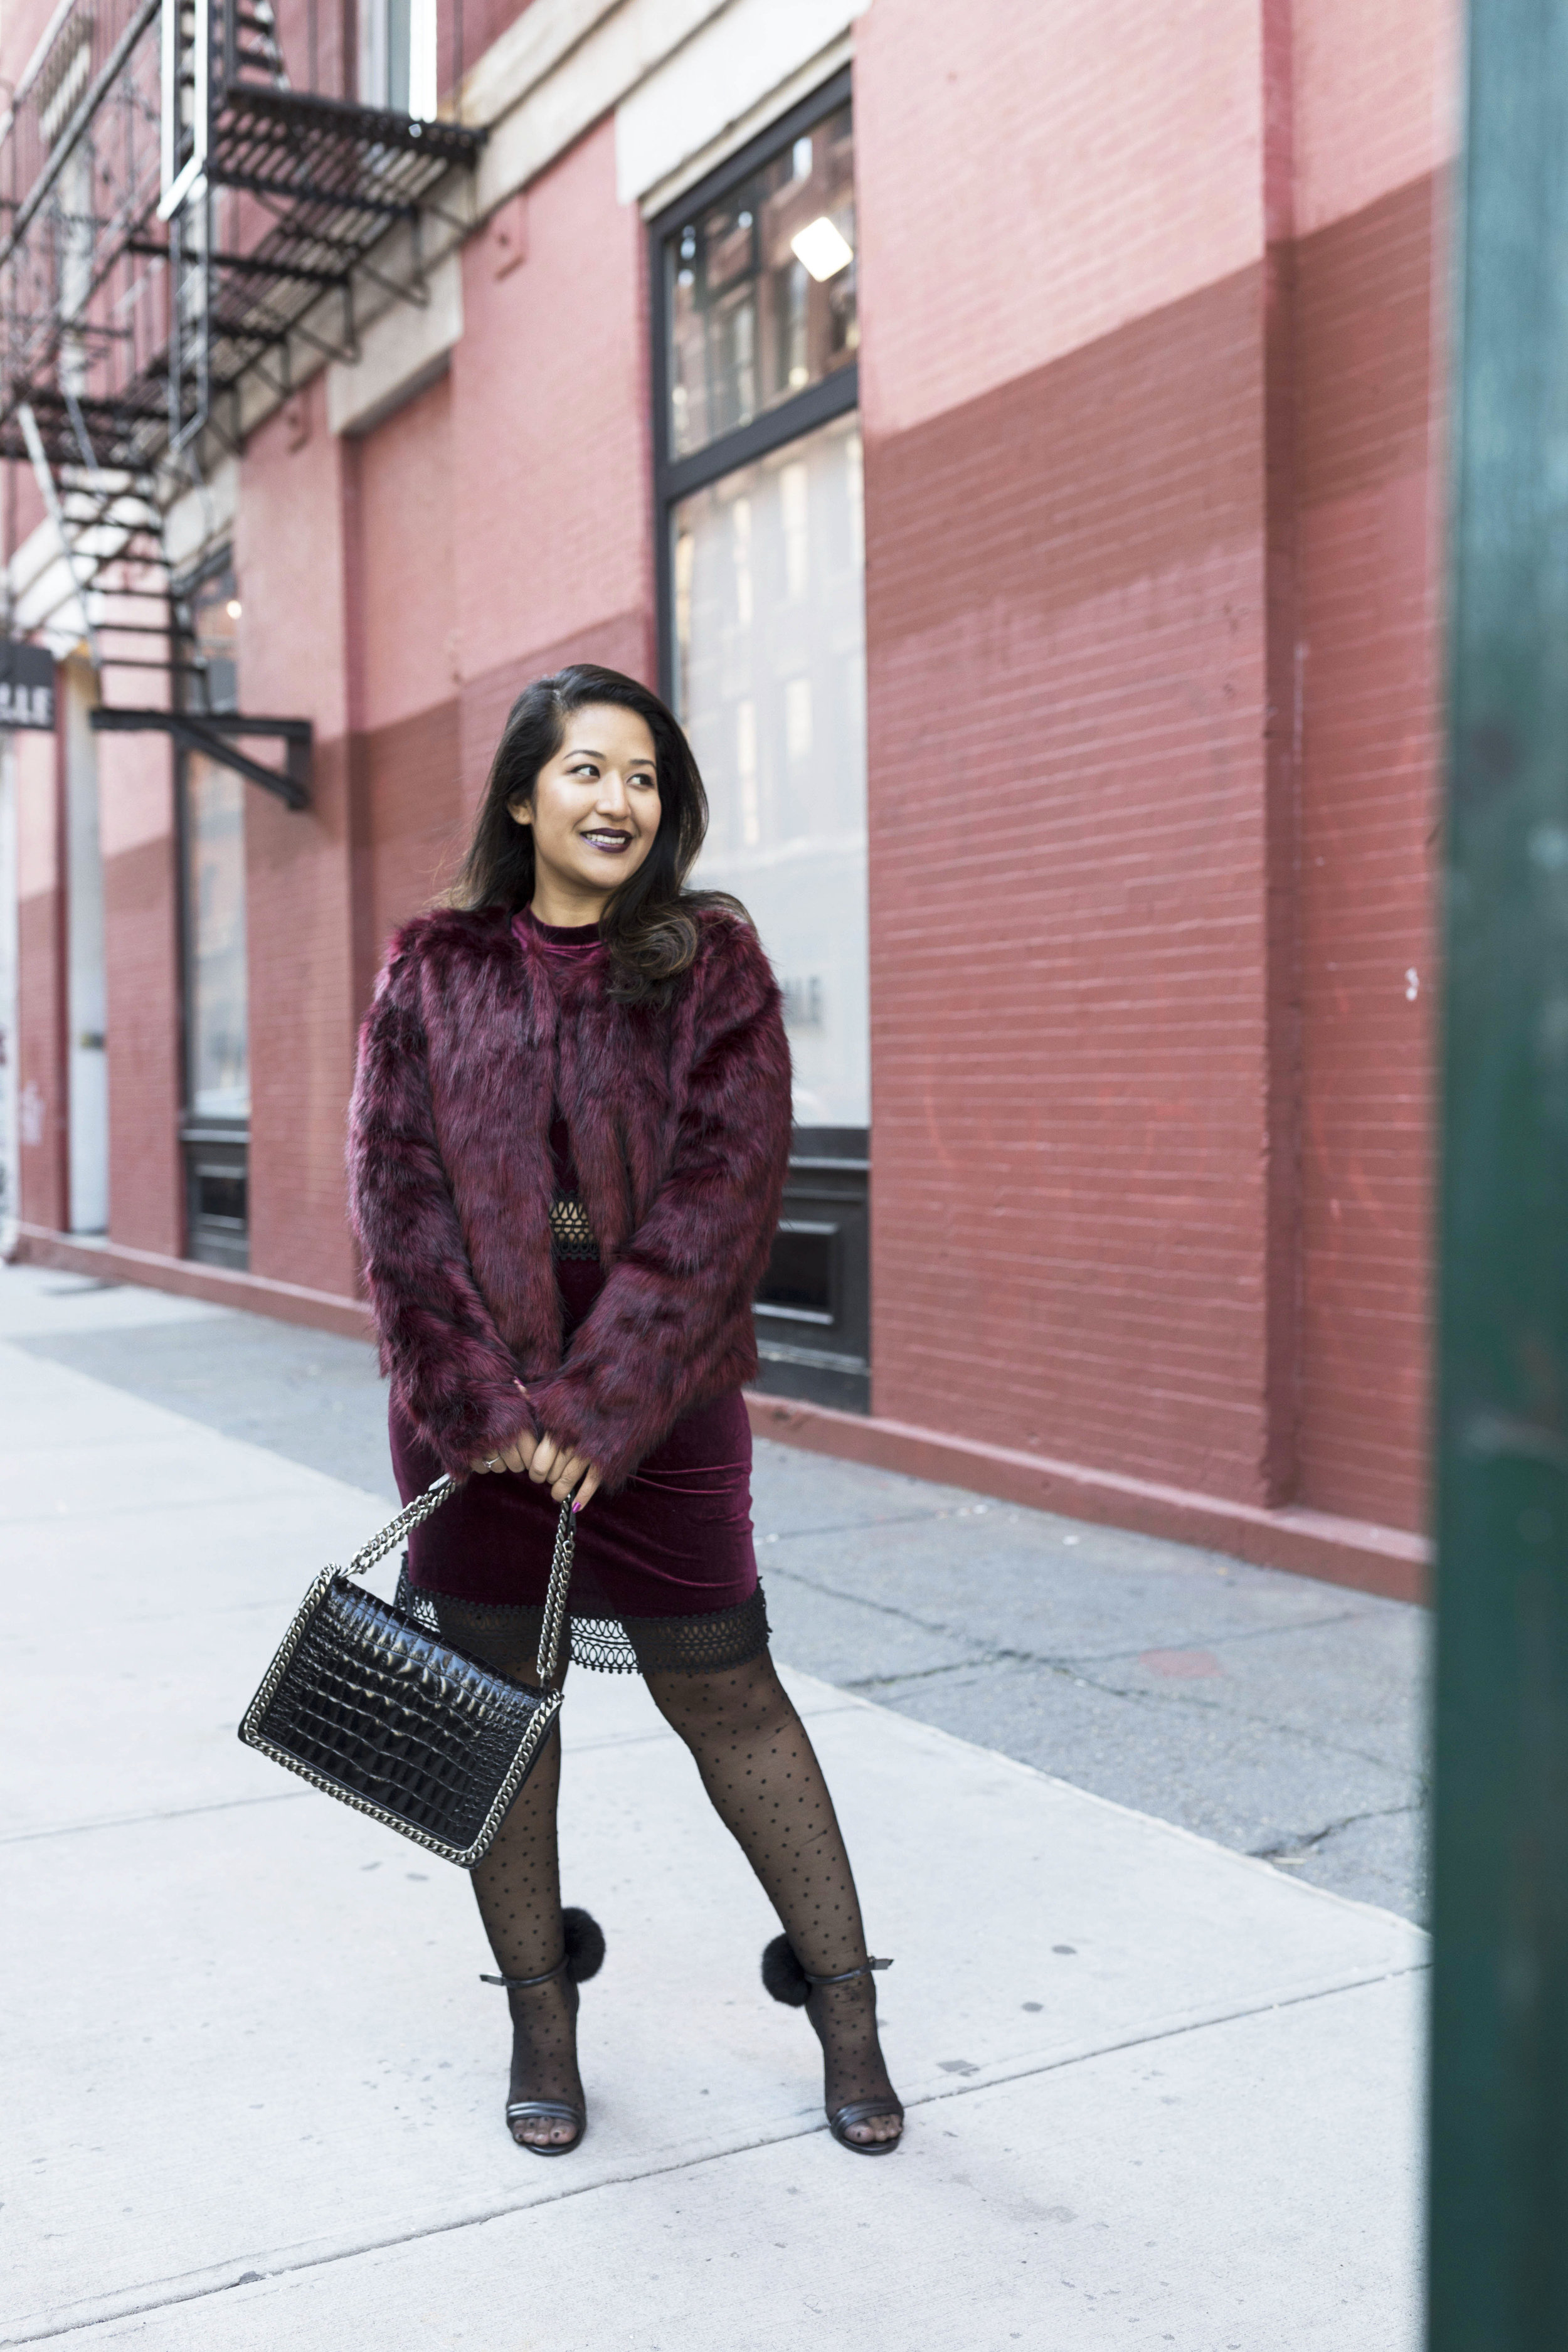 Krity S x Holiday Outfit x Century 21 Burgundy Velvet Dress and Faux Fur2.jpg